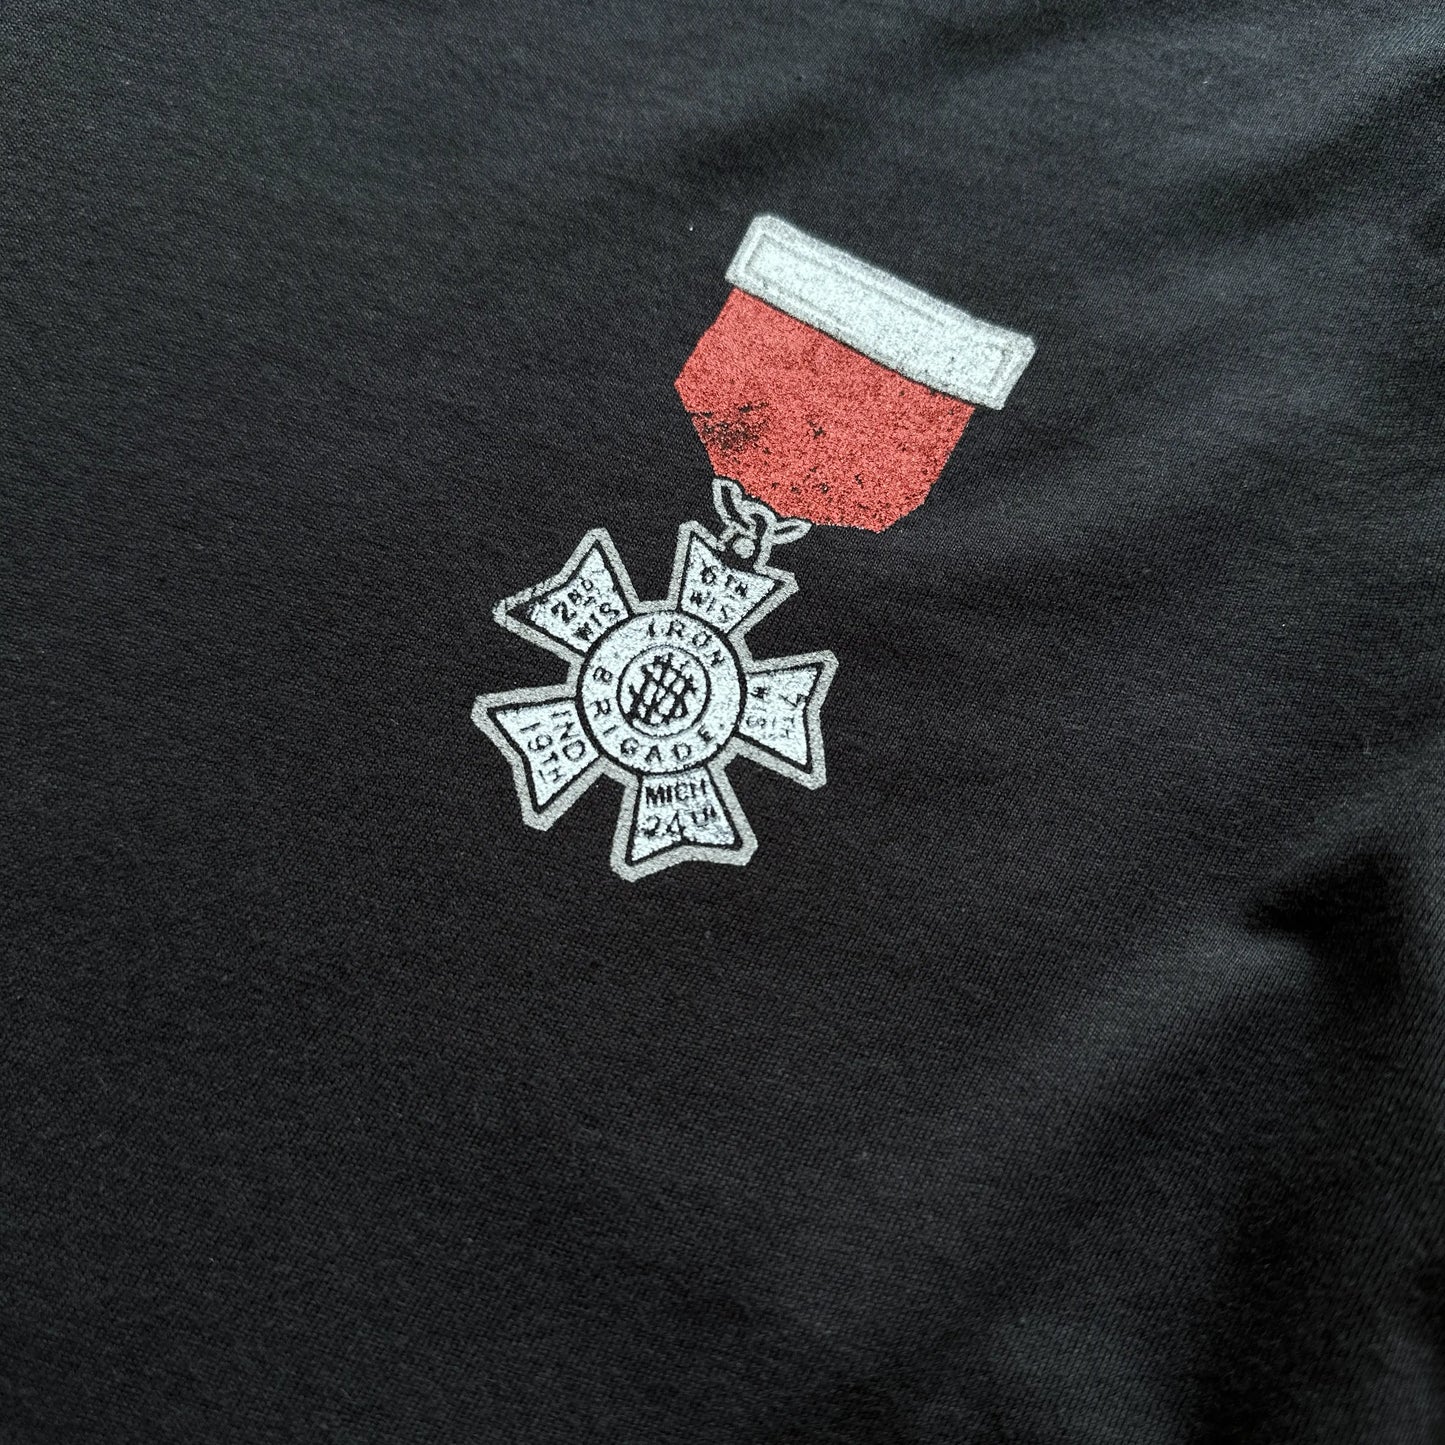 Close-up of front design of The Civil War "Iron Brigade" Shirt Made in America from The History List store